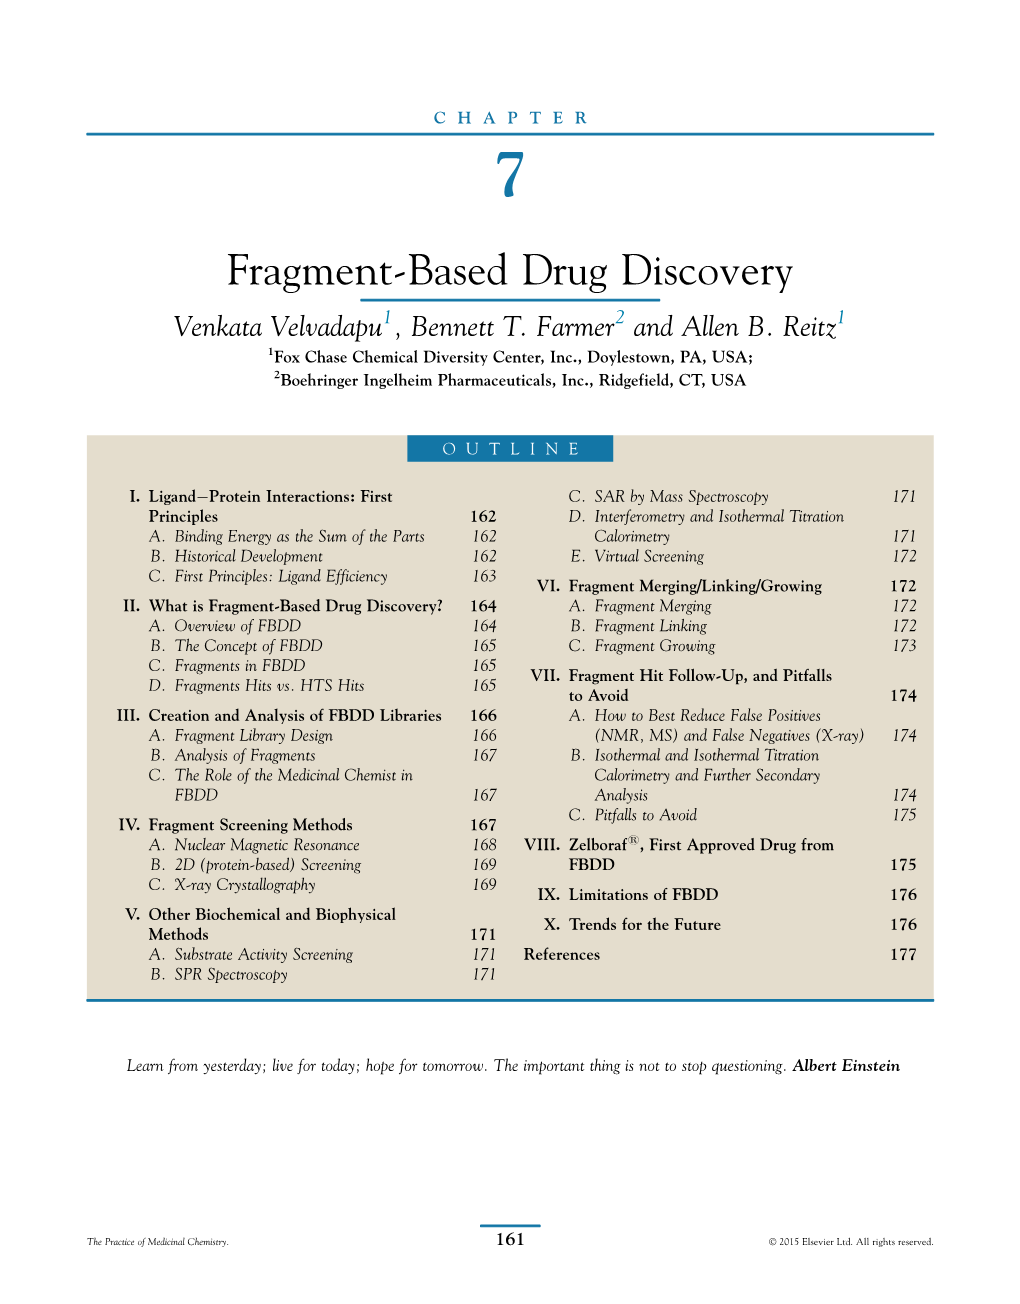 Chapter 7. Fragment-Based Drug Discovery